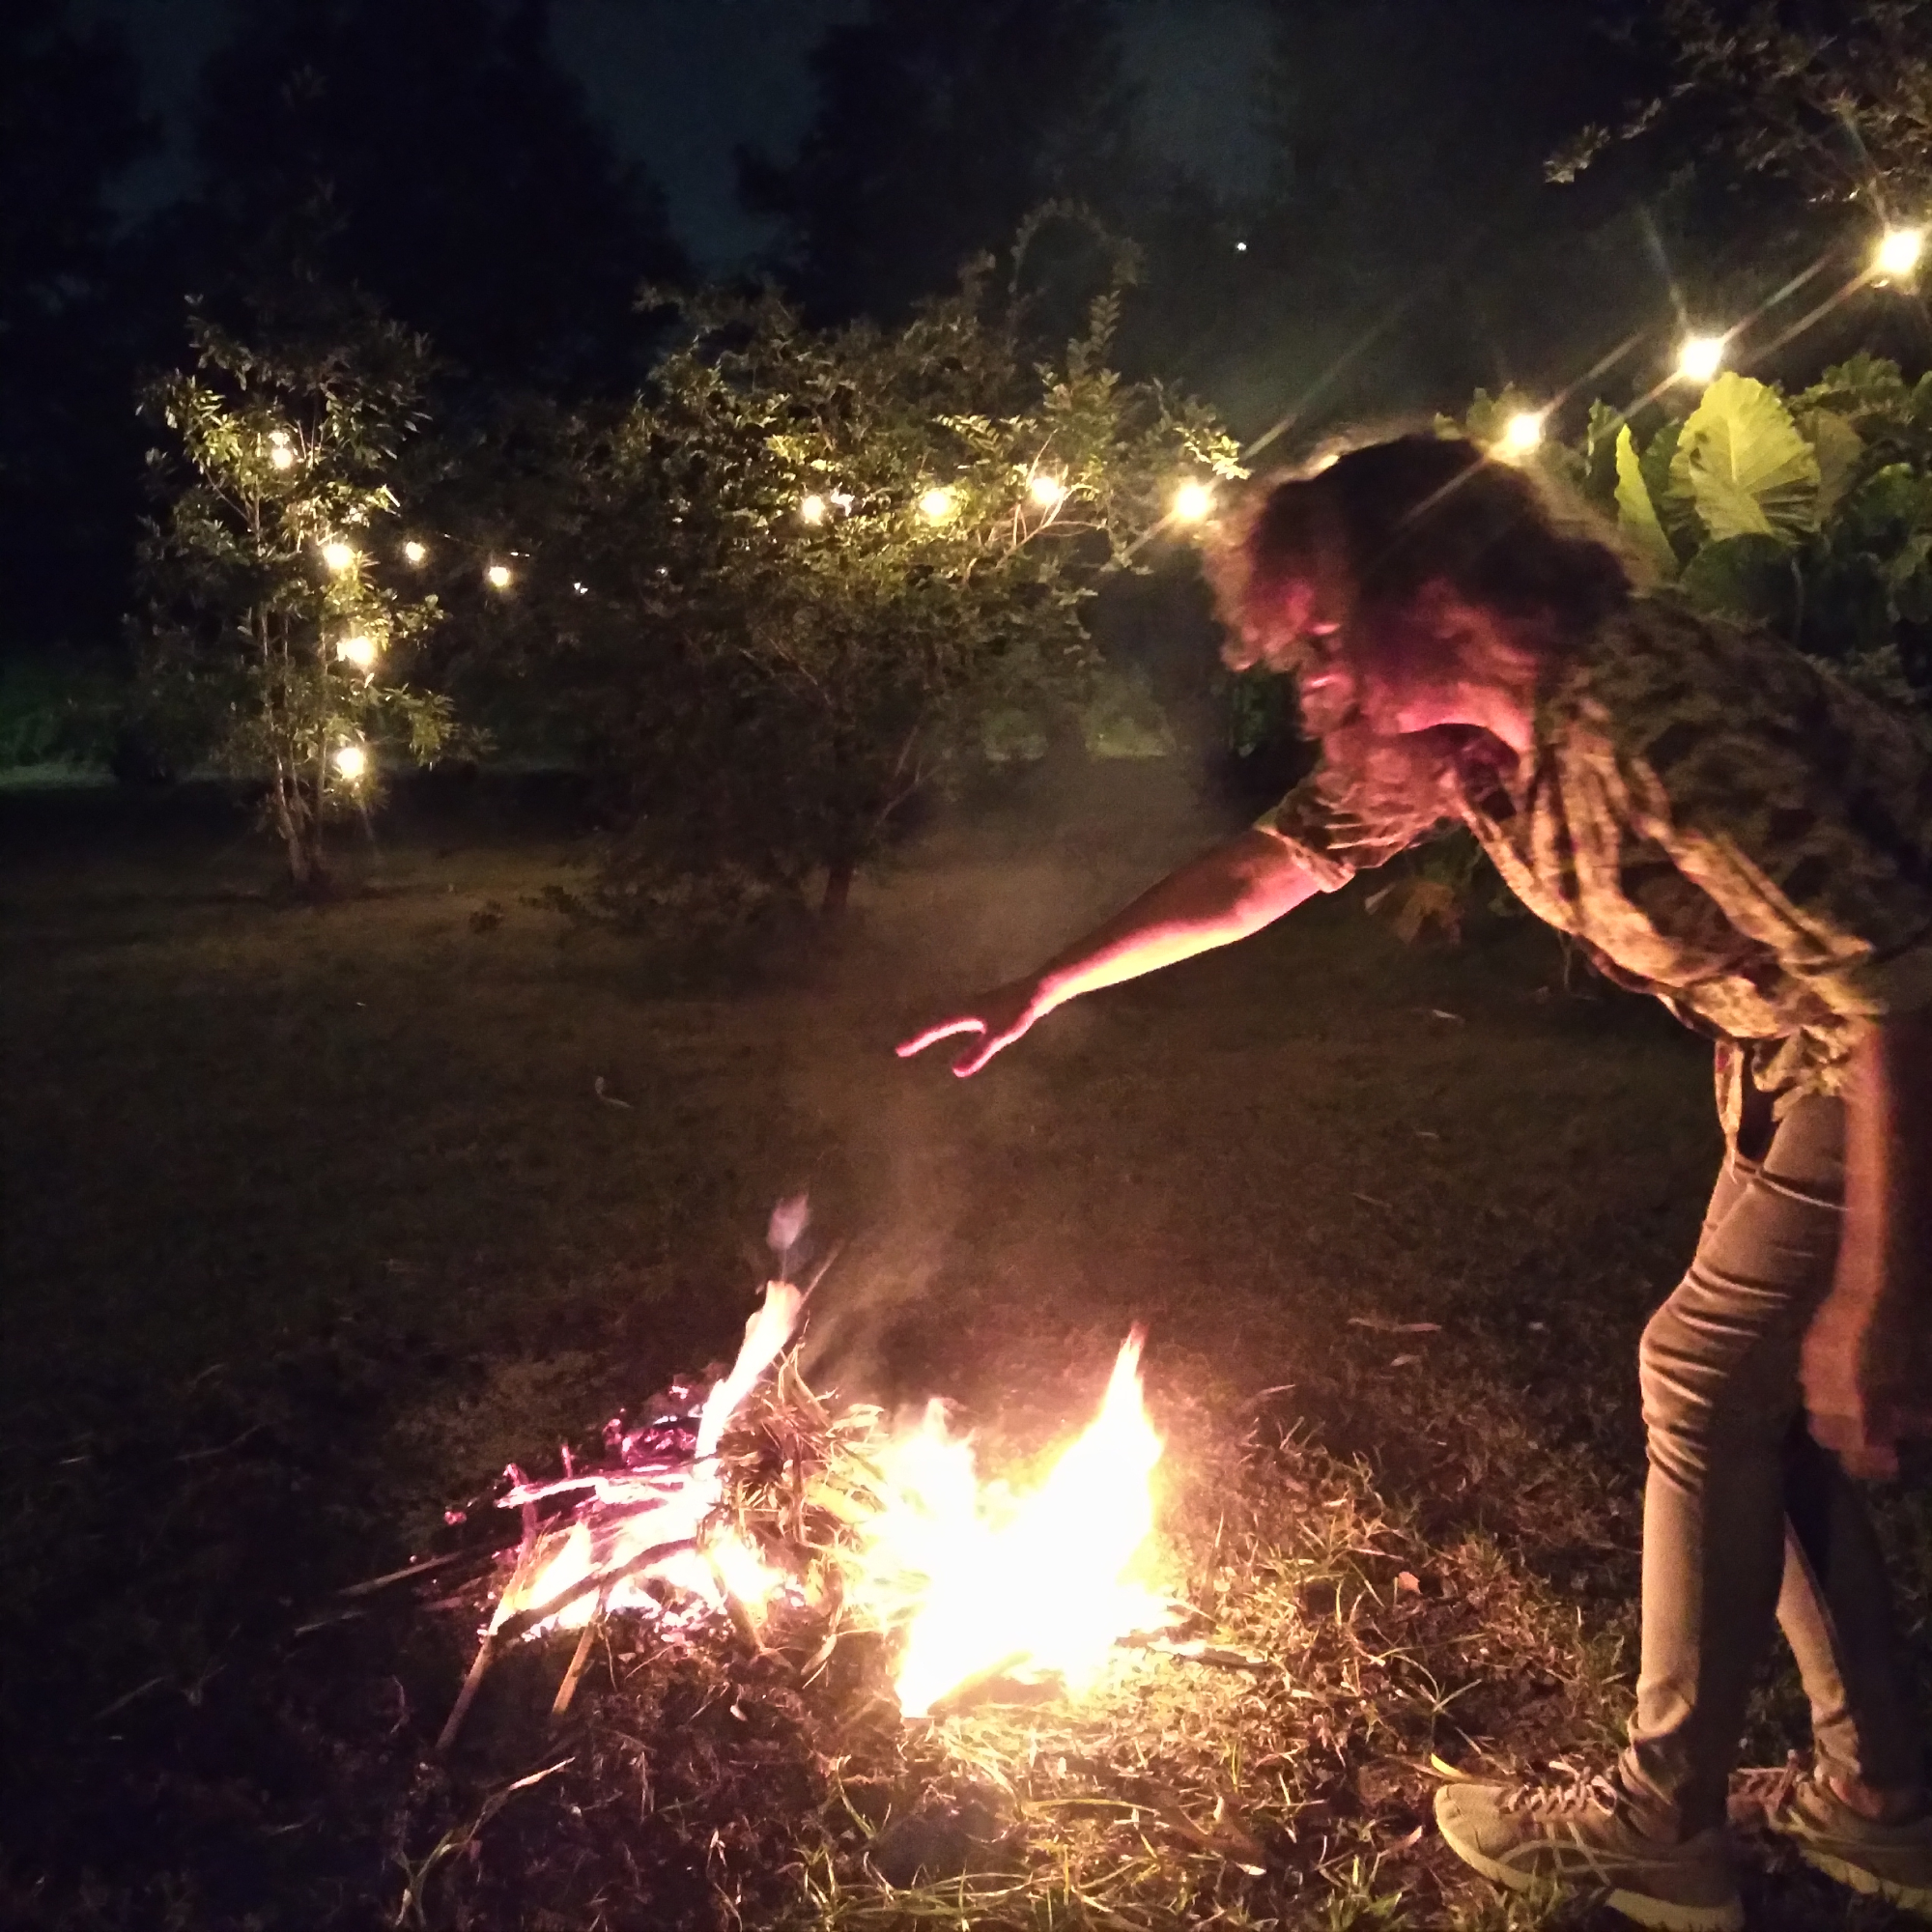 Gina puts leaves on a fire, New Orleans, October 23, 2021.